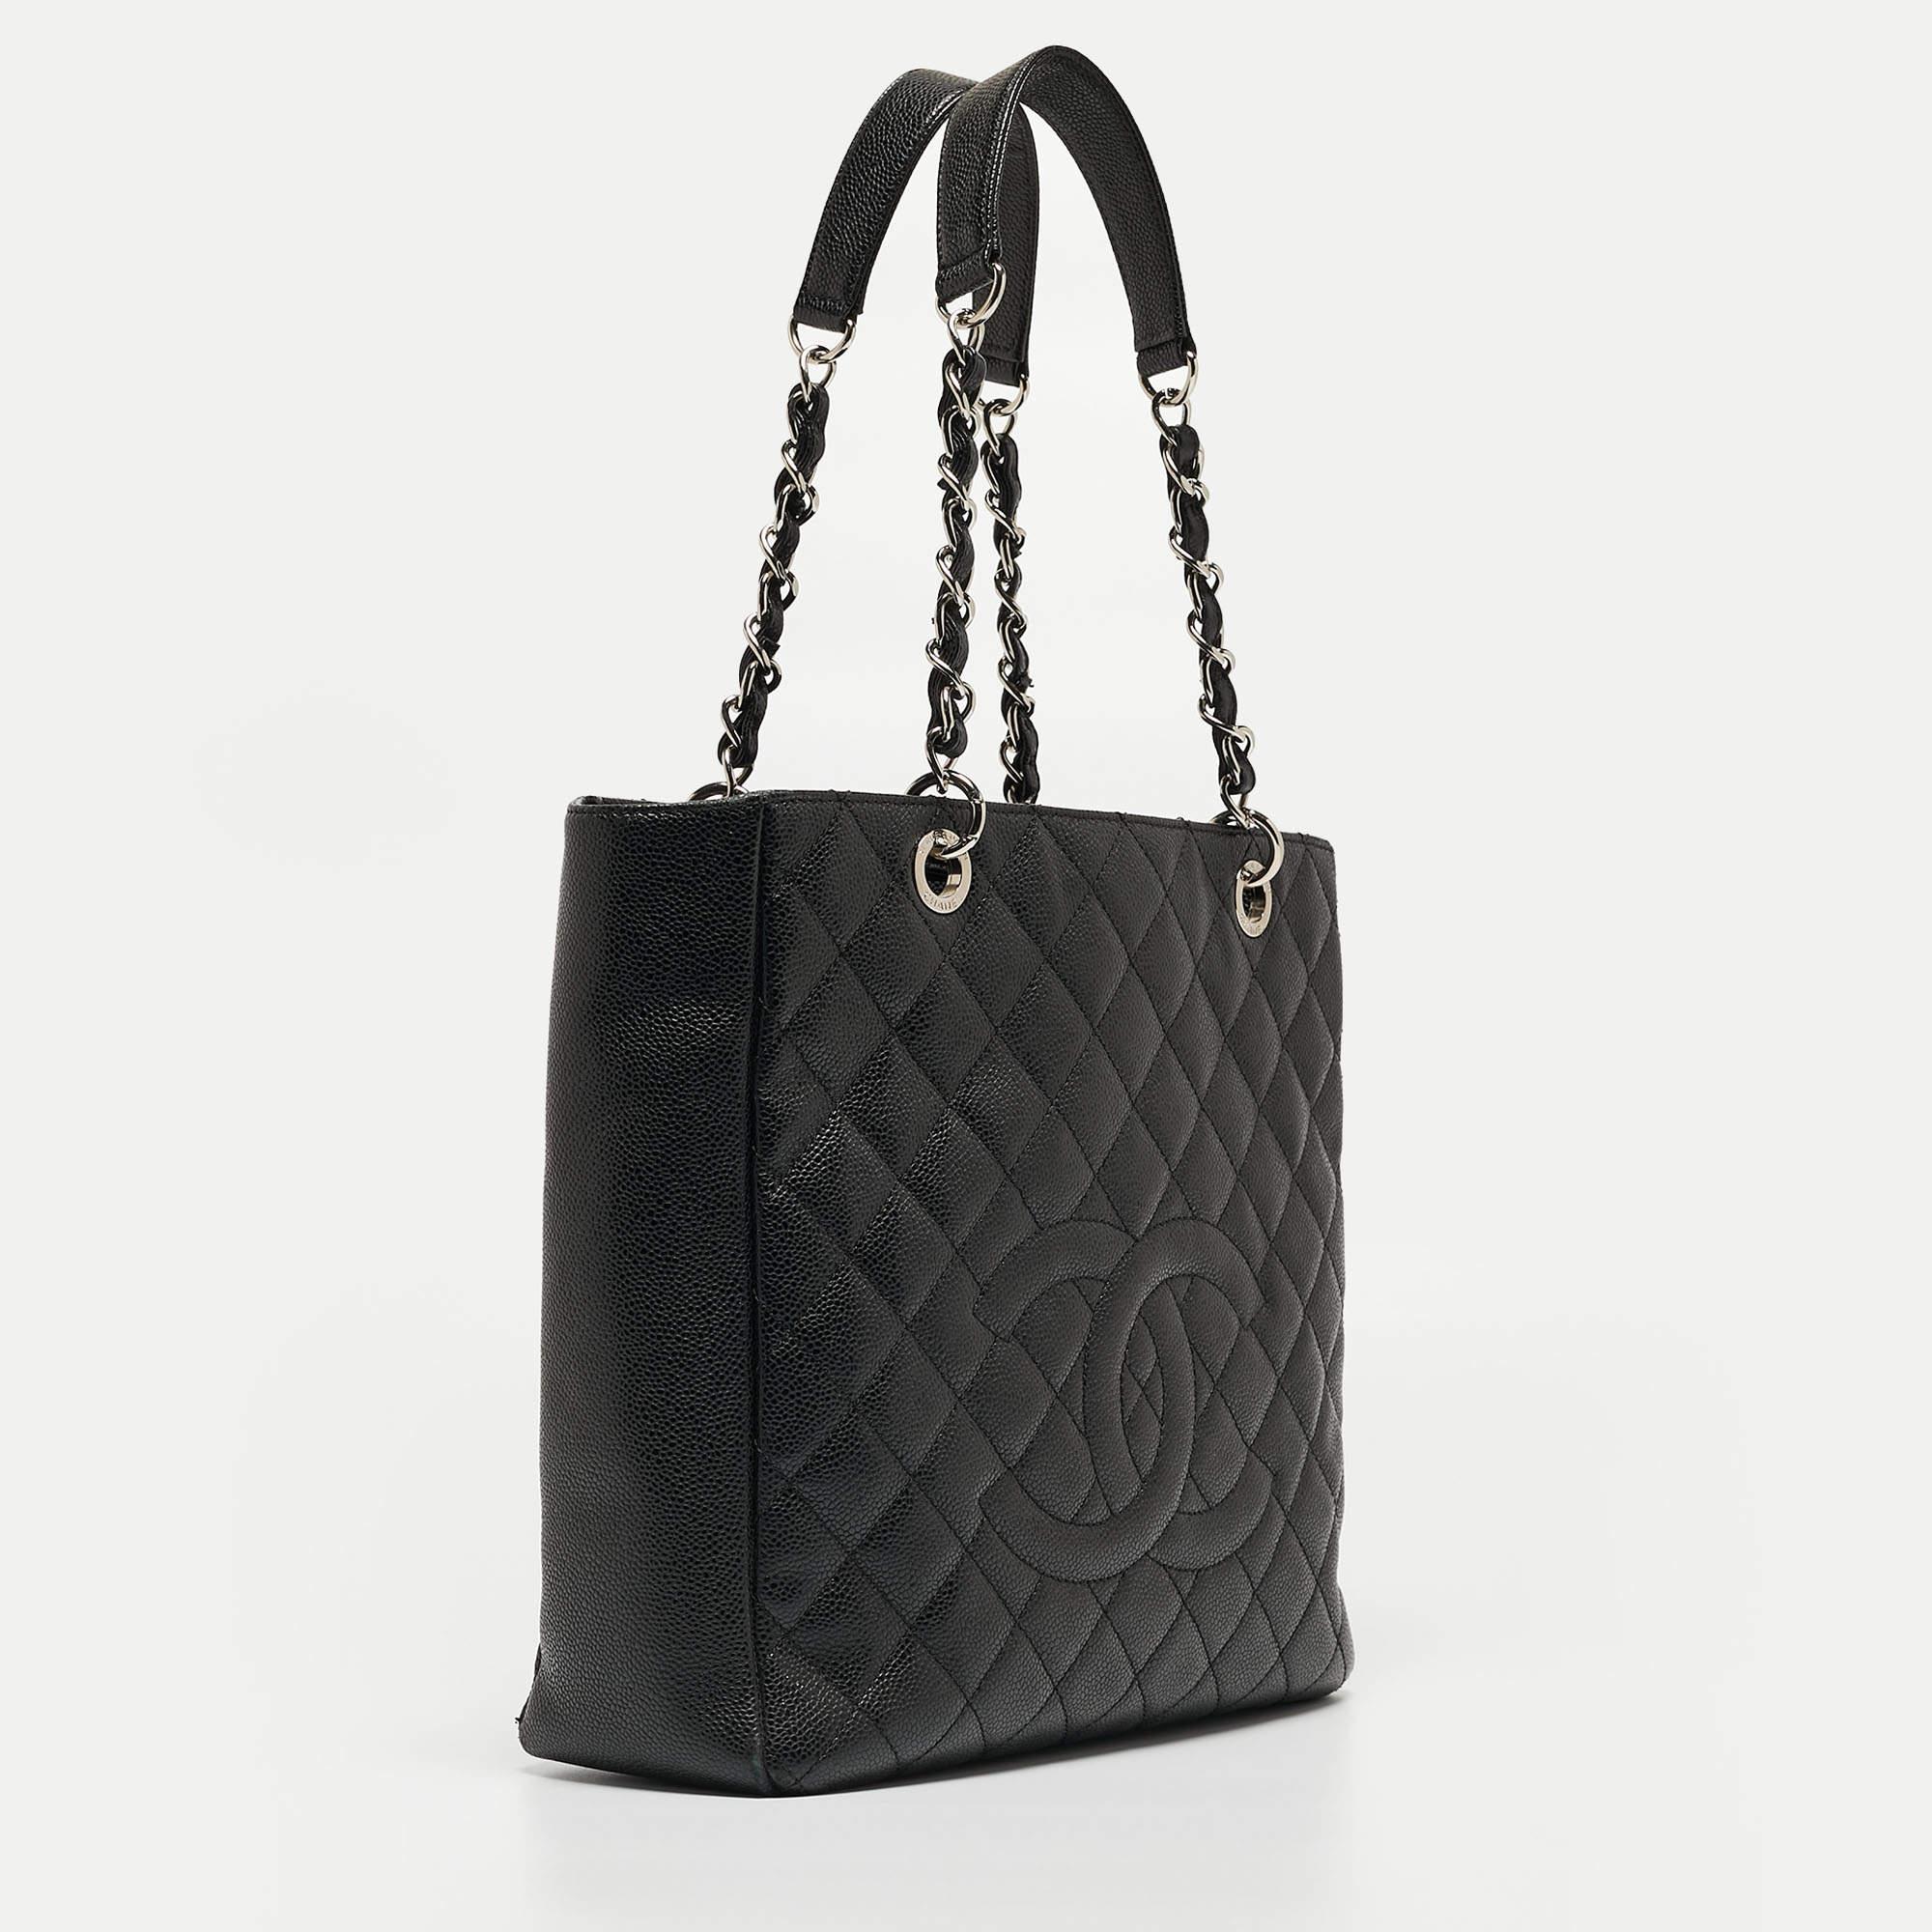 Chanel Black Caviar Quilted Leather CC Tote For Sale 9